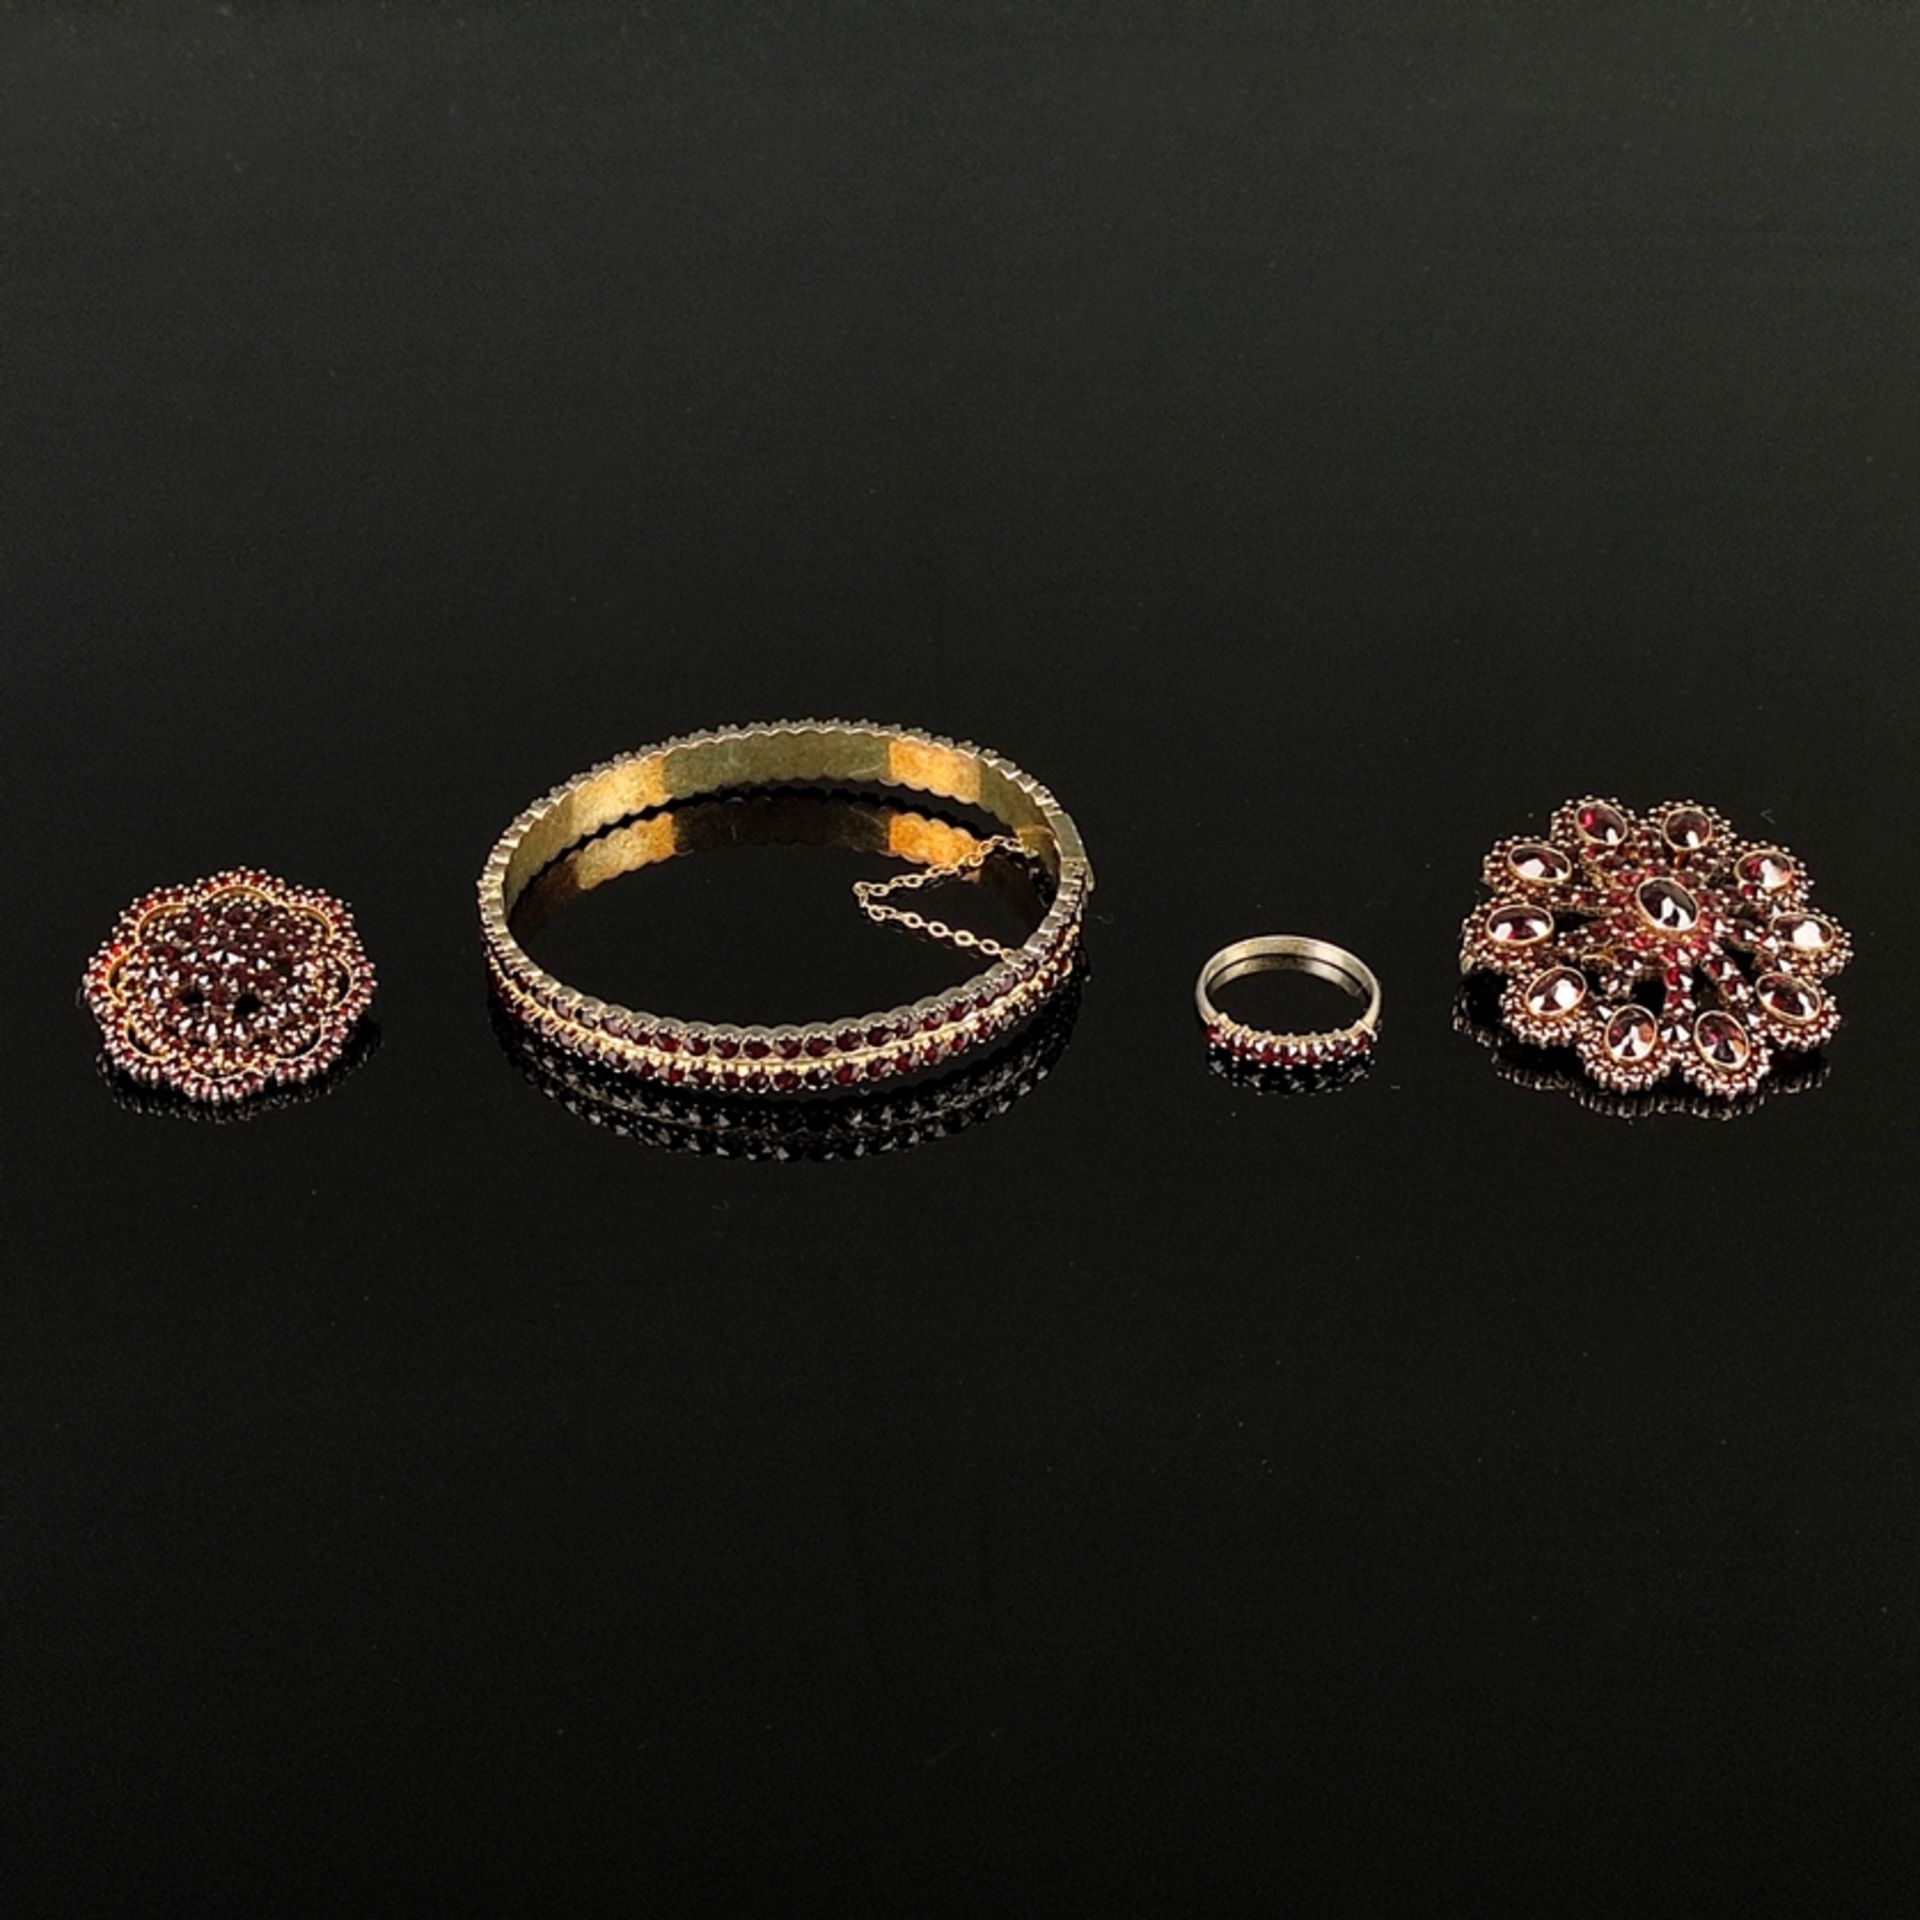 Lot of antique garnet jewellery, 4 pieces, silver 900 gilt (all hallmarked), total weight 52,7g, co